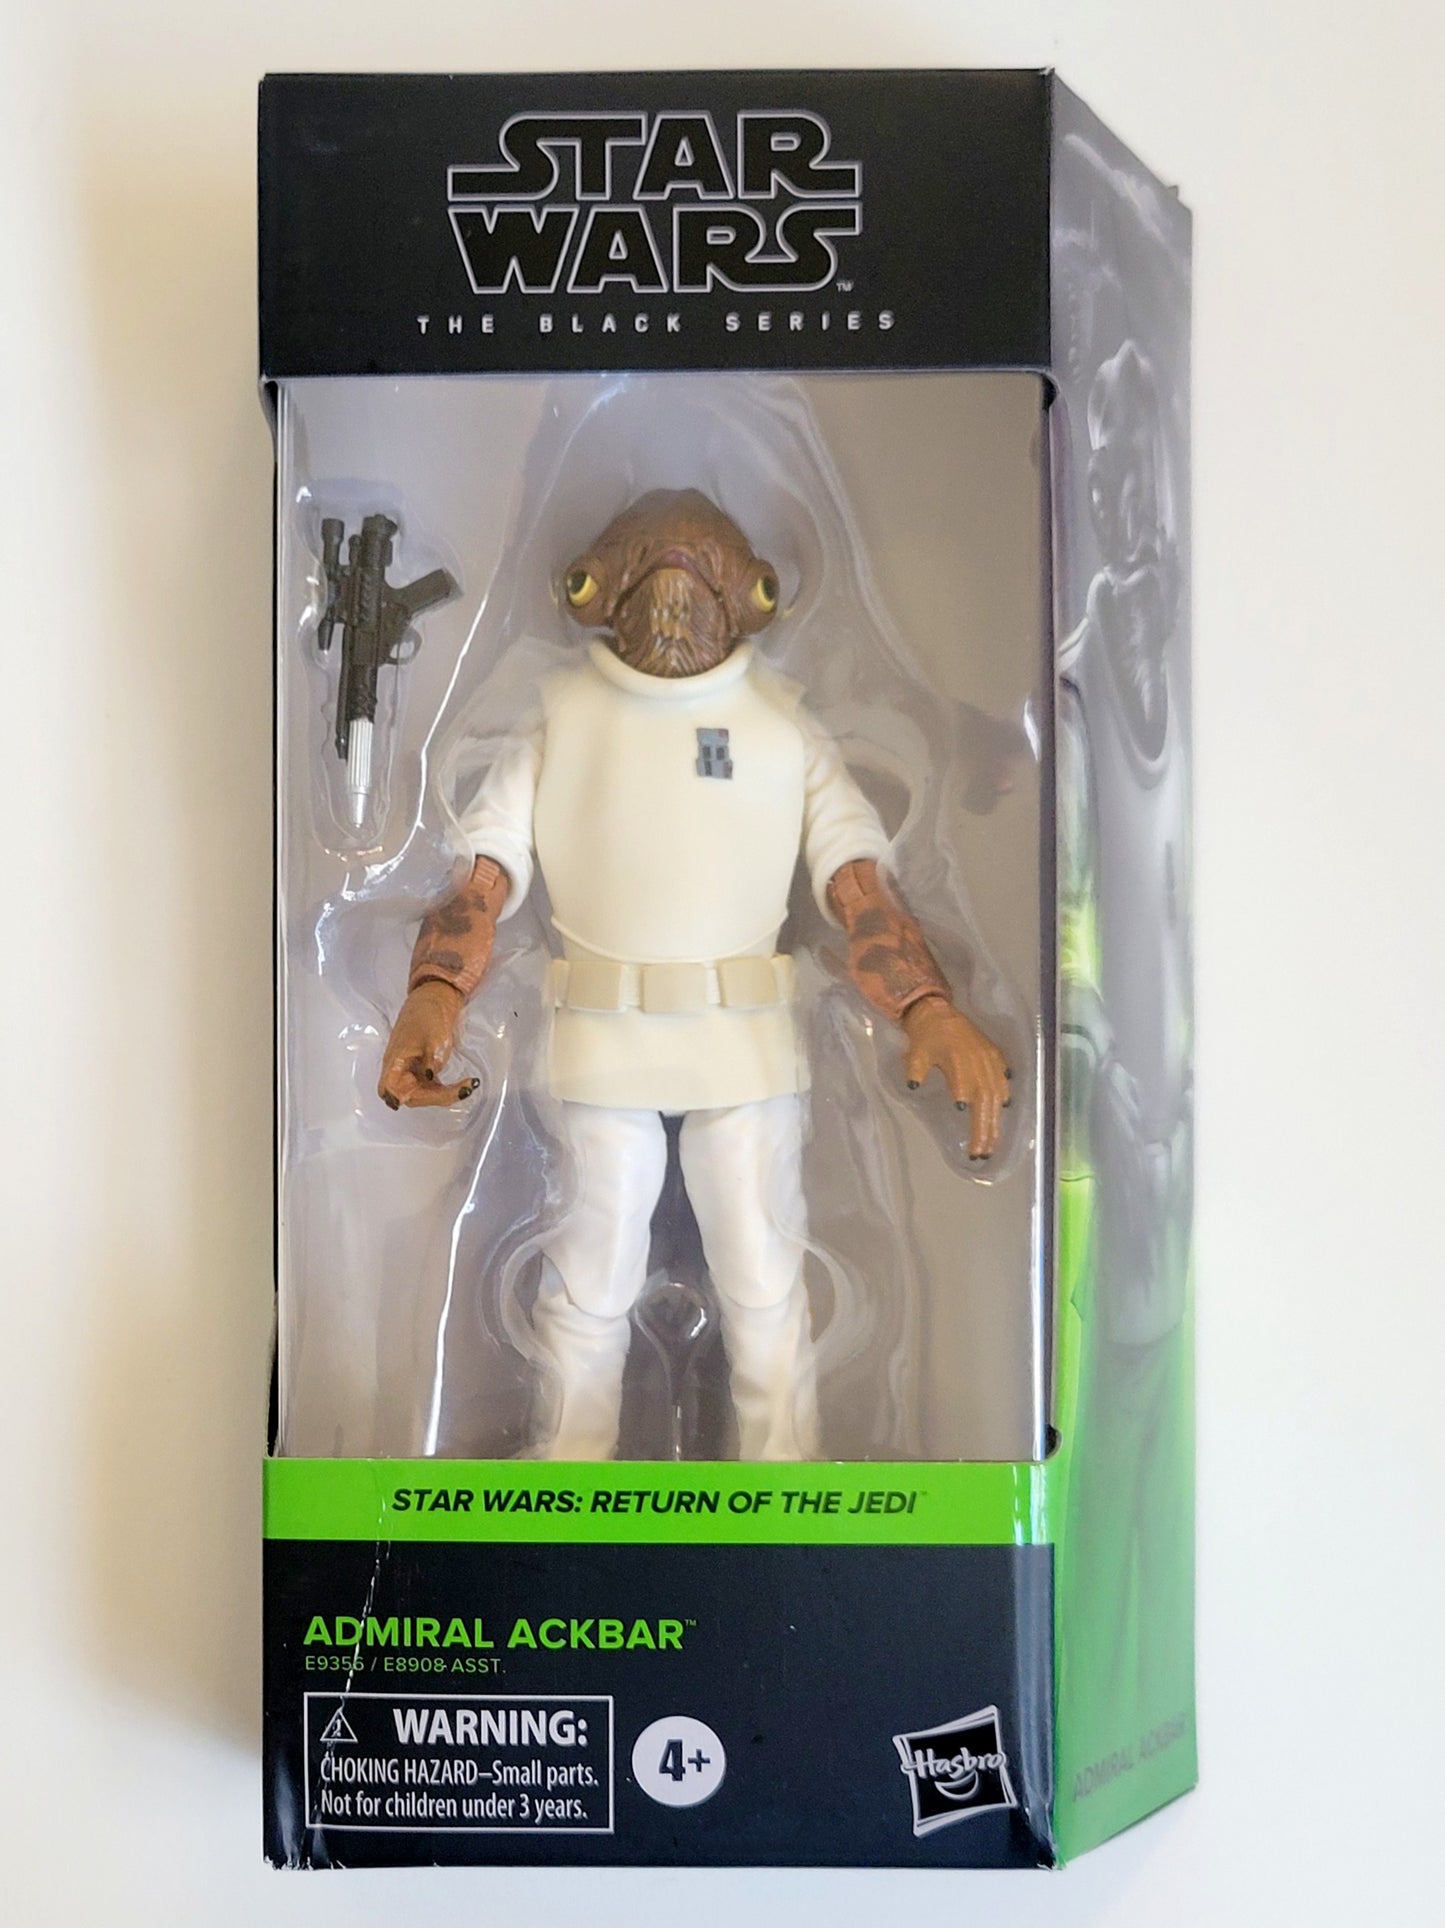 Star Wars: The Black Series Admiral Ackbar 6-Inch Action Figure from Star Wars: Return of the Jedi